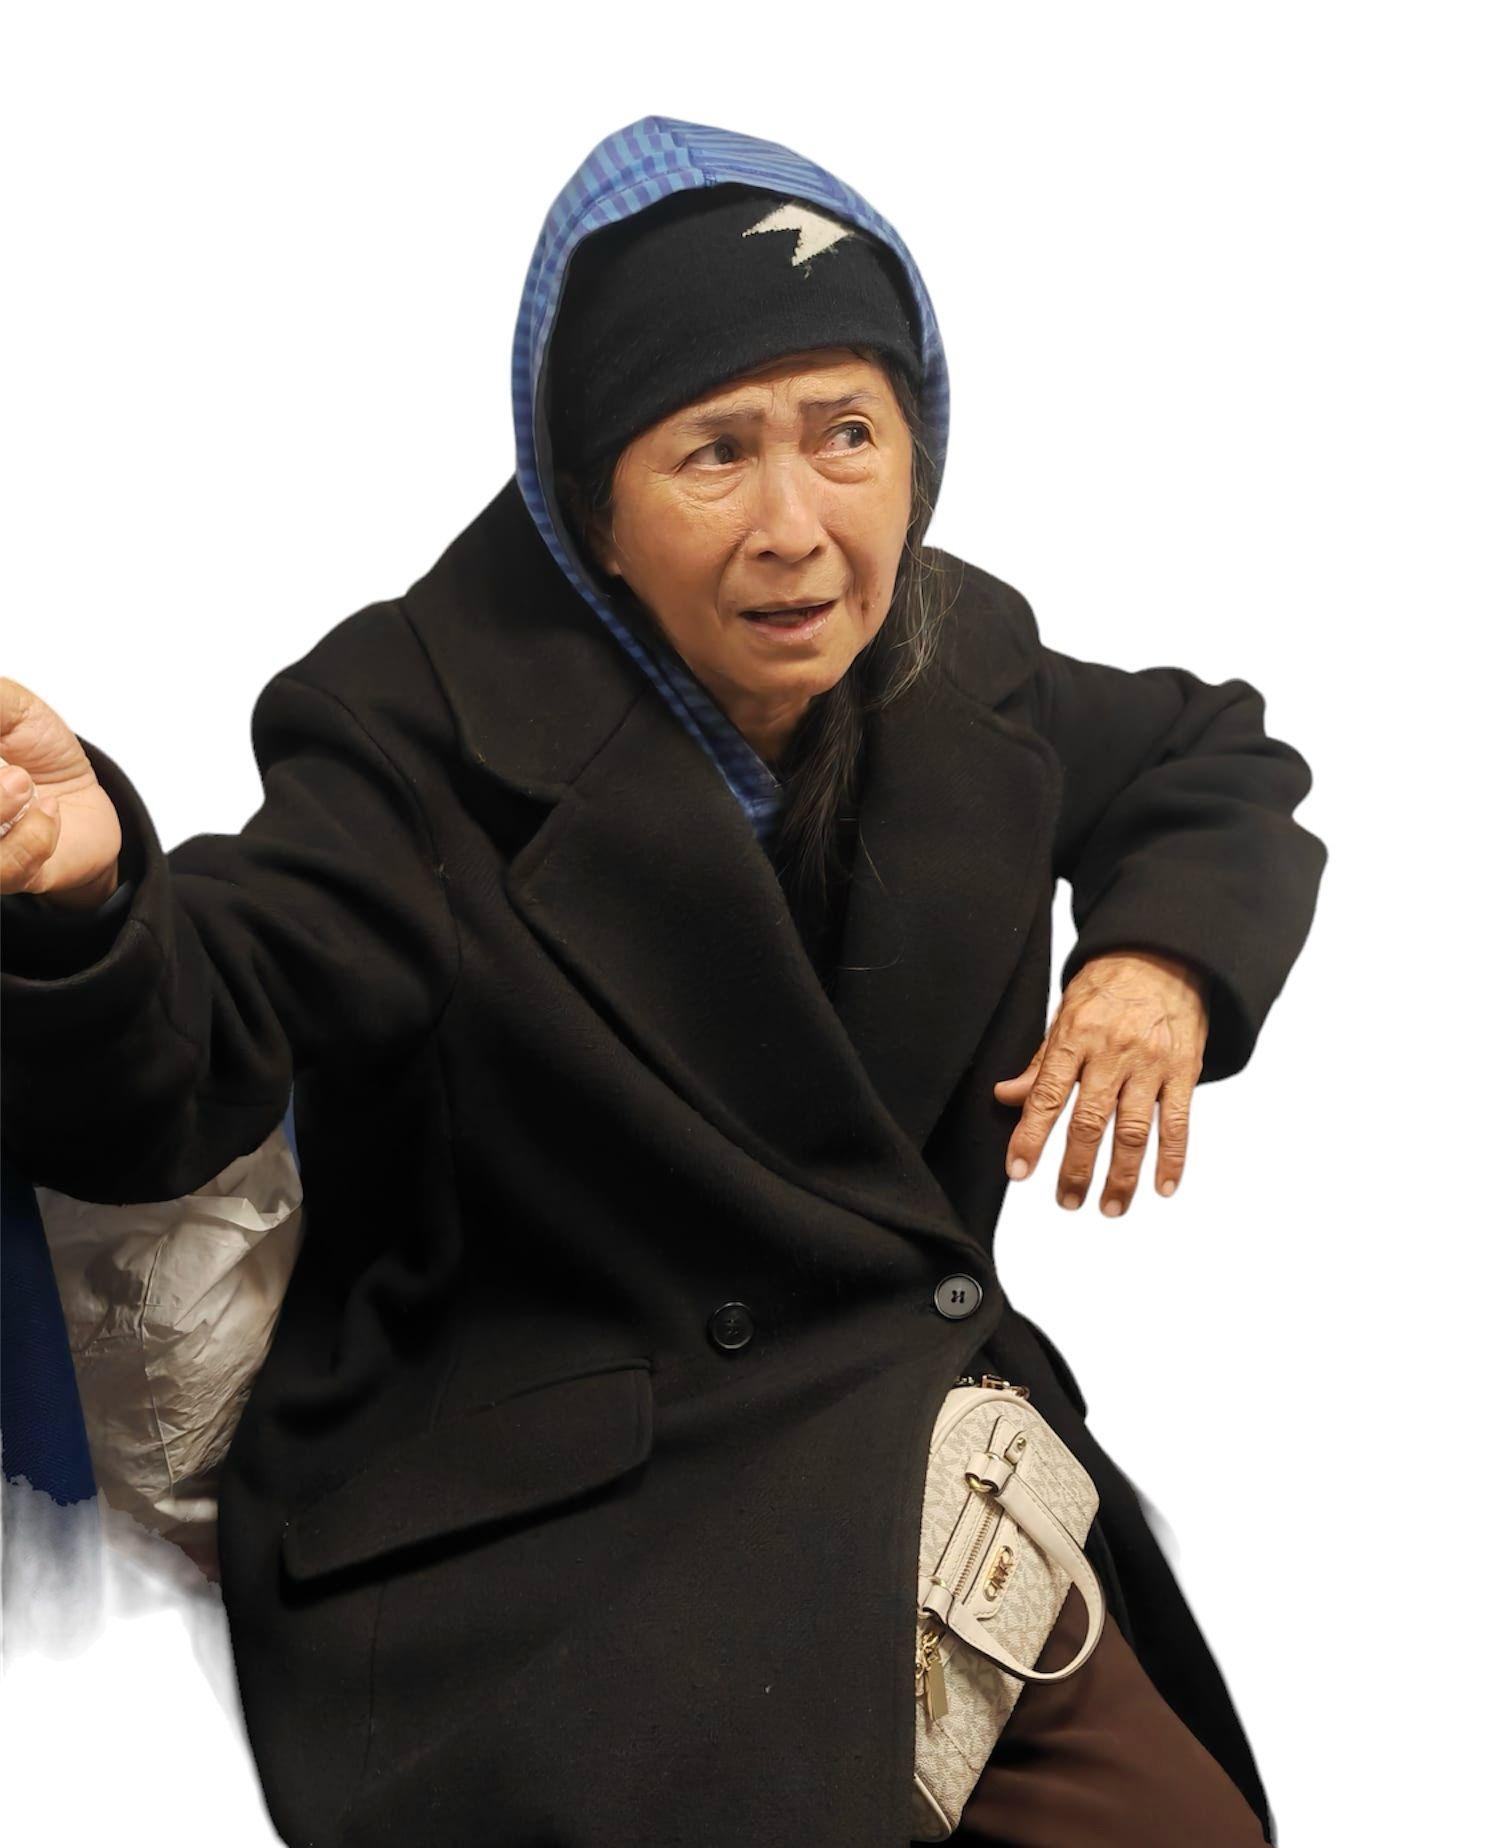 A foreign woman, Yuson Elizabeth Arnoco, aged 61, is about 1.55 metres tall, 54 kilograms in weight and of medium build. She has a pointed face with yellow complexion and black and white long hair. She was last seen wearing a black beanie, a blue hoodie, a black coat, brown pants, black shoes and carrying a white handbag.
